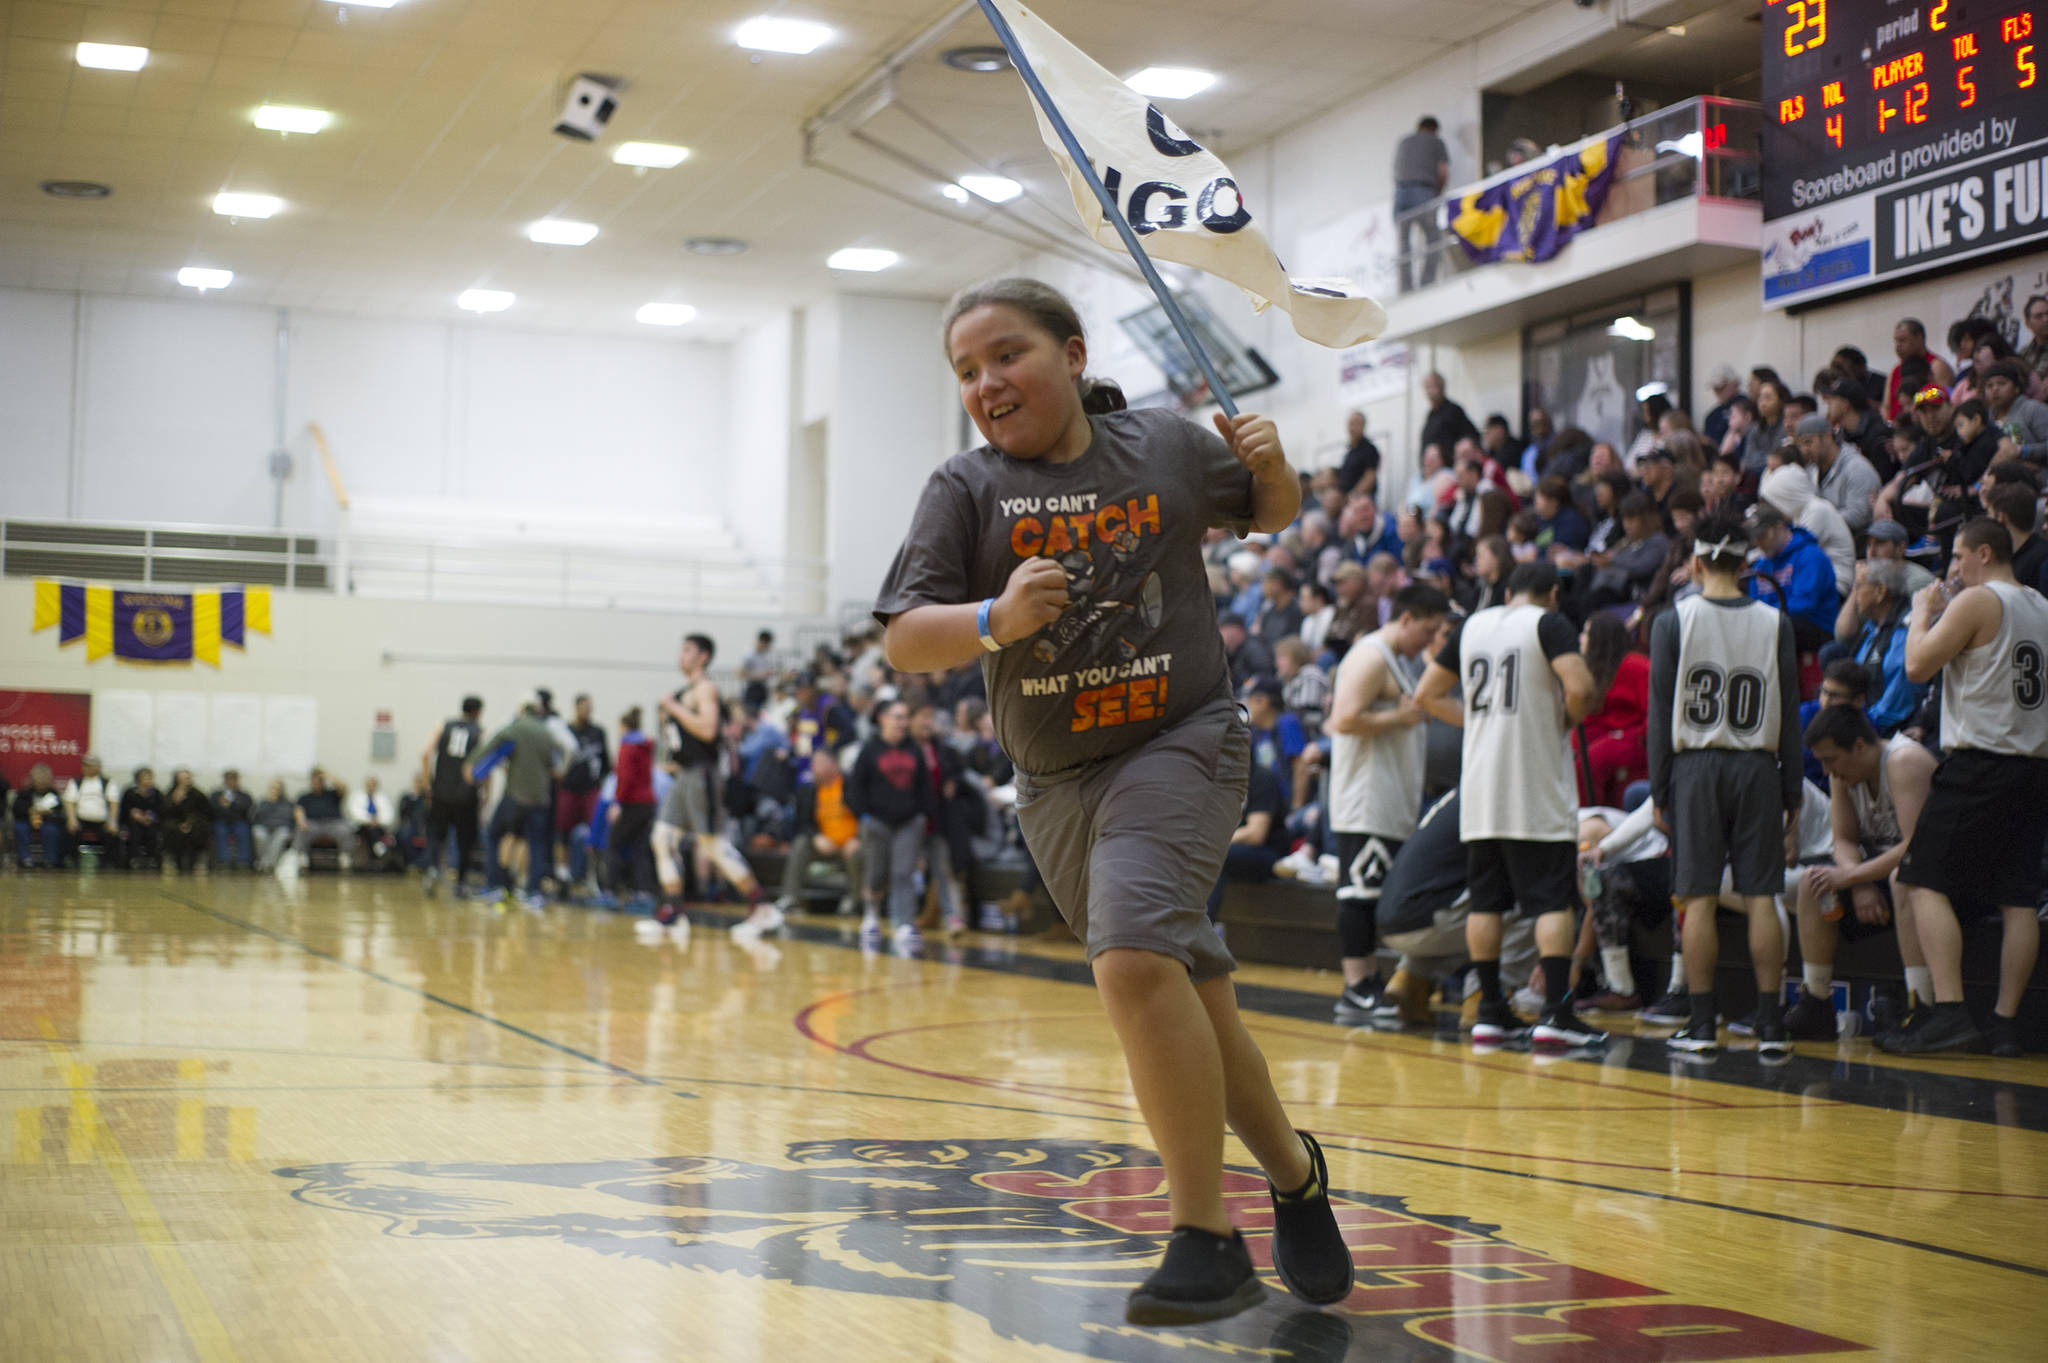 A young fan runs with runs with a Angoon flag in between the first and second quarters of Angoon’s B Bracket game against Metlakatla. (Nolin Ainsworth | Juneau Empire)